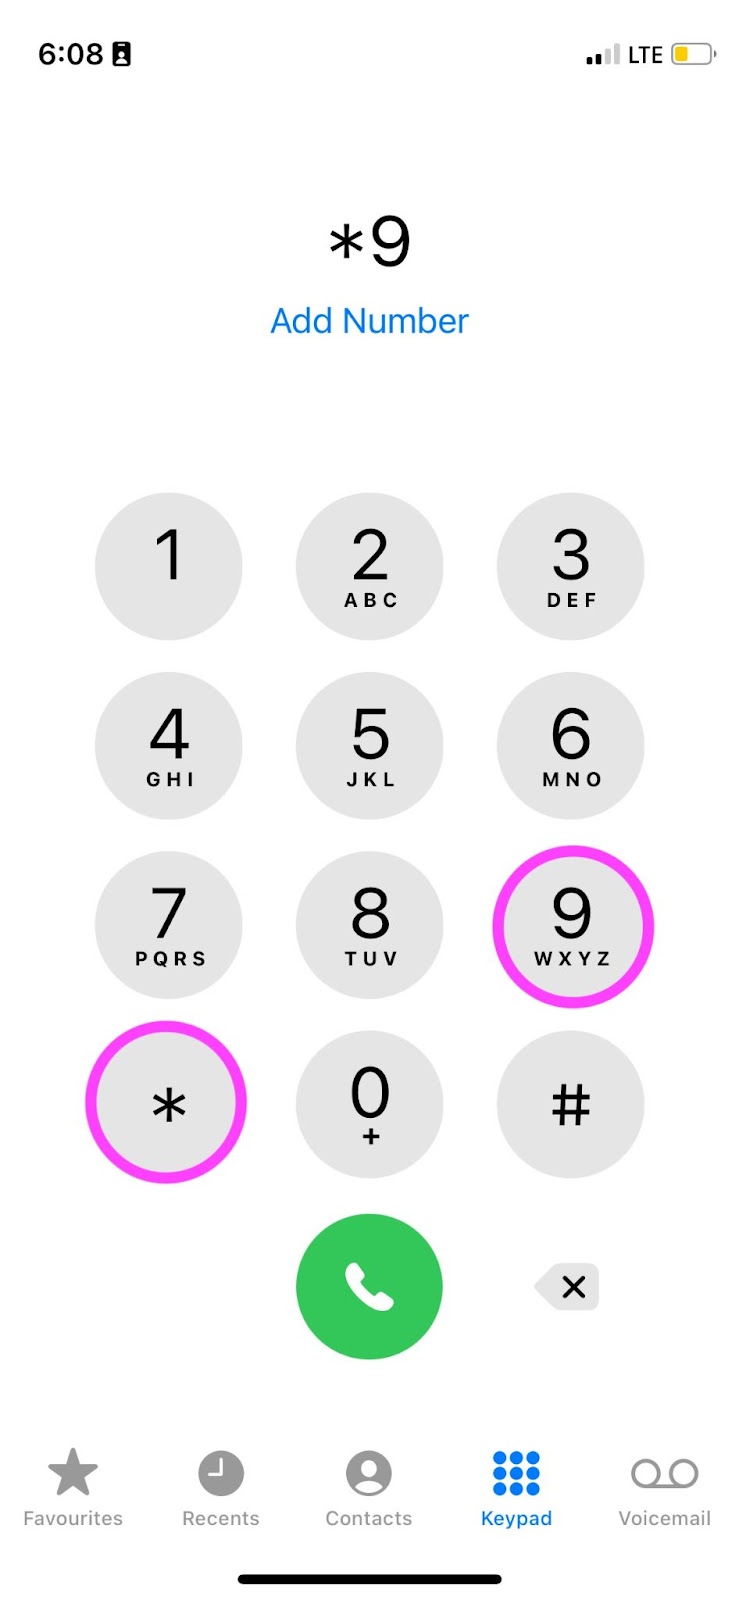 How to raise your hand in Zoom on Dial-in calls - Dial *9